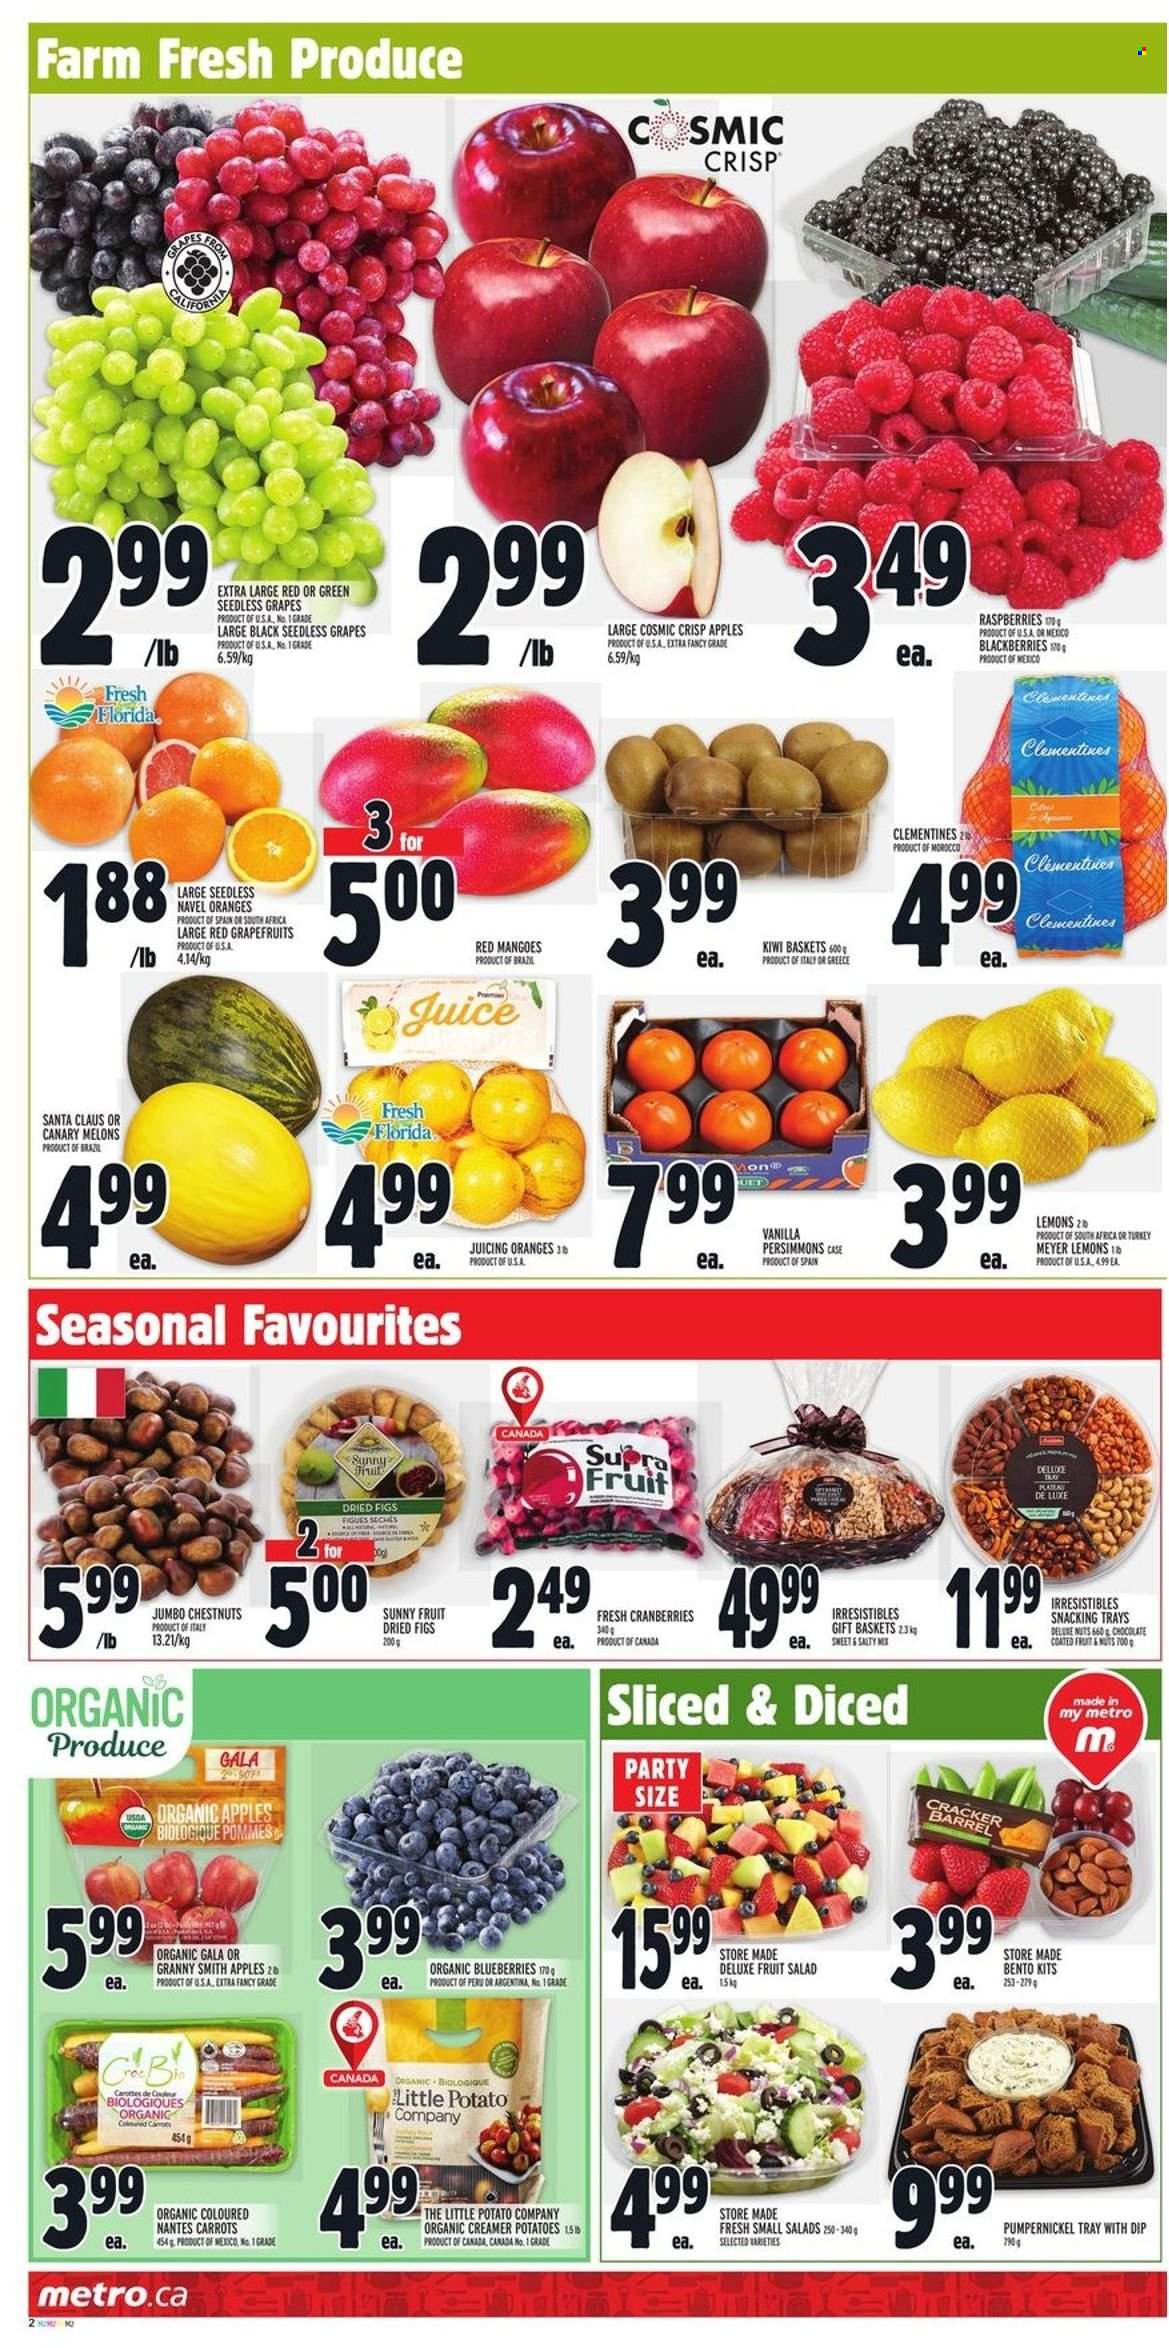 thumbnail - Metro Flyer - December 02, 2021 - December 08, 2021 - Sales products - carrots, potatoes, salad, apples, blackberries, blueberries, clementines, figs, Gala, grapefruits, grapes, seedless grapes, persimmons, melons, lemons, Granny Smith, navel oranges, dip, chocolate, Santa, cranberries, fruit salad, chestnuts, dried figs, Sunny Fruit, juice, basket, tray, kiwi, oranges. Page 2.